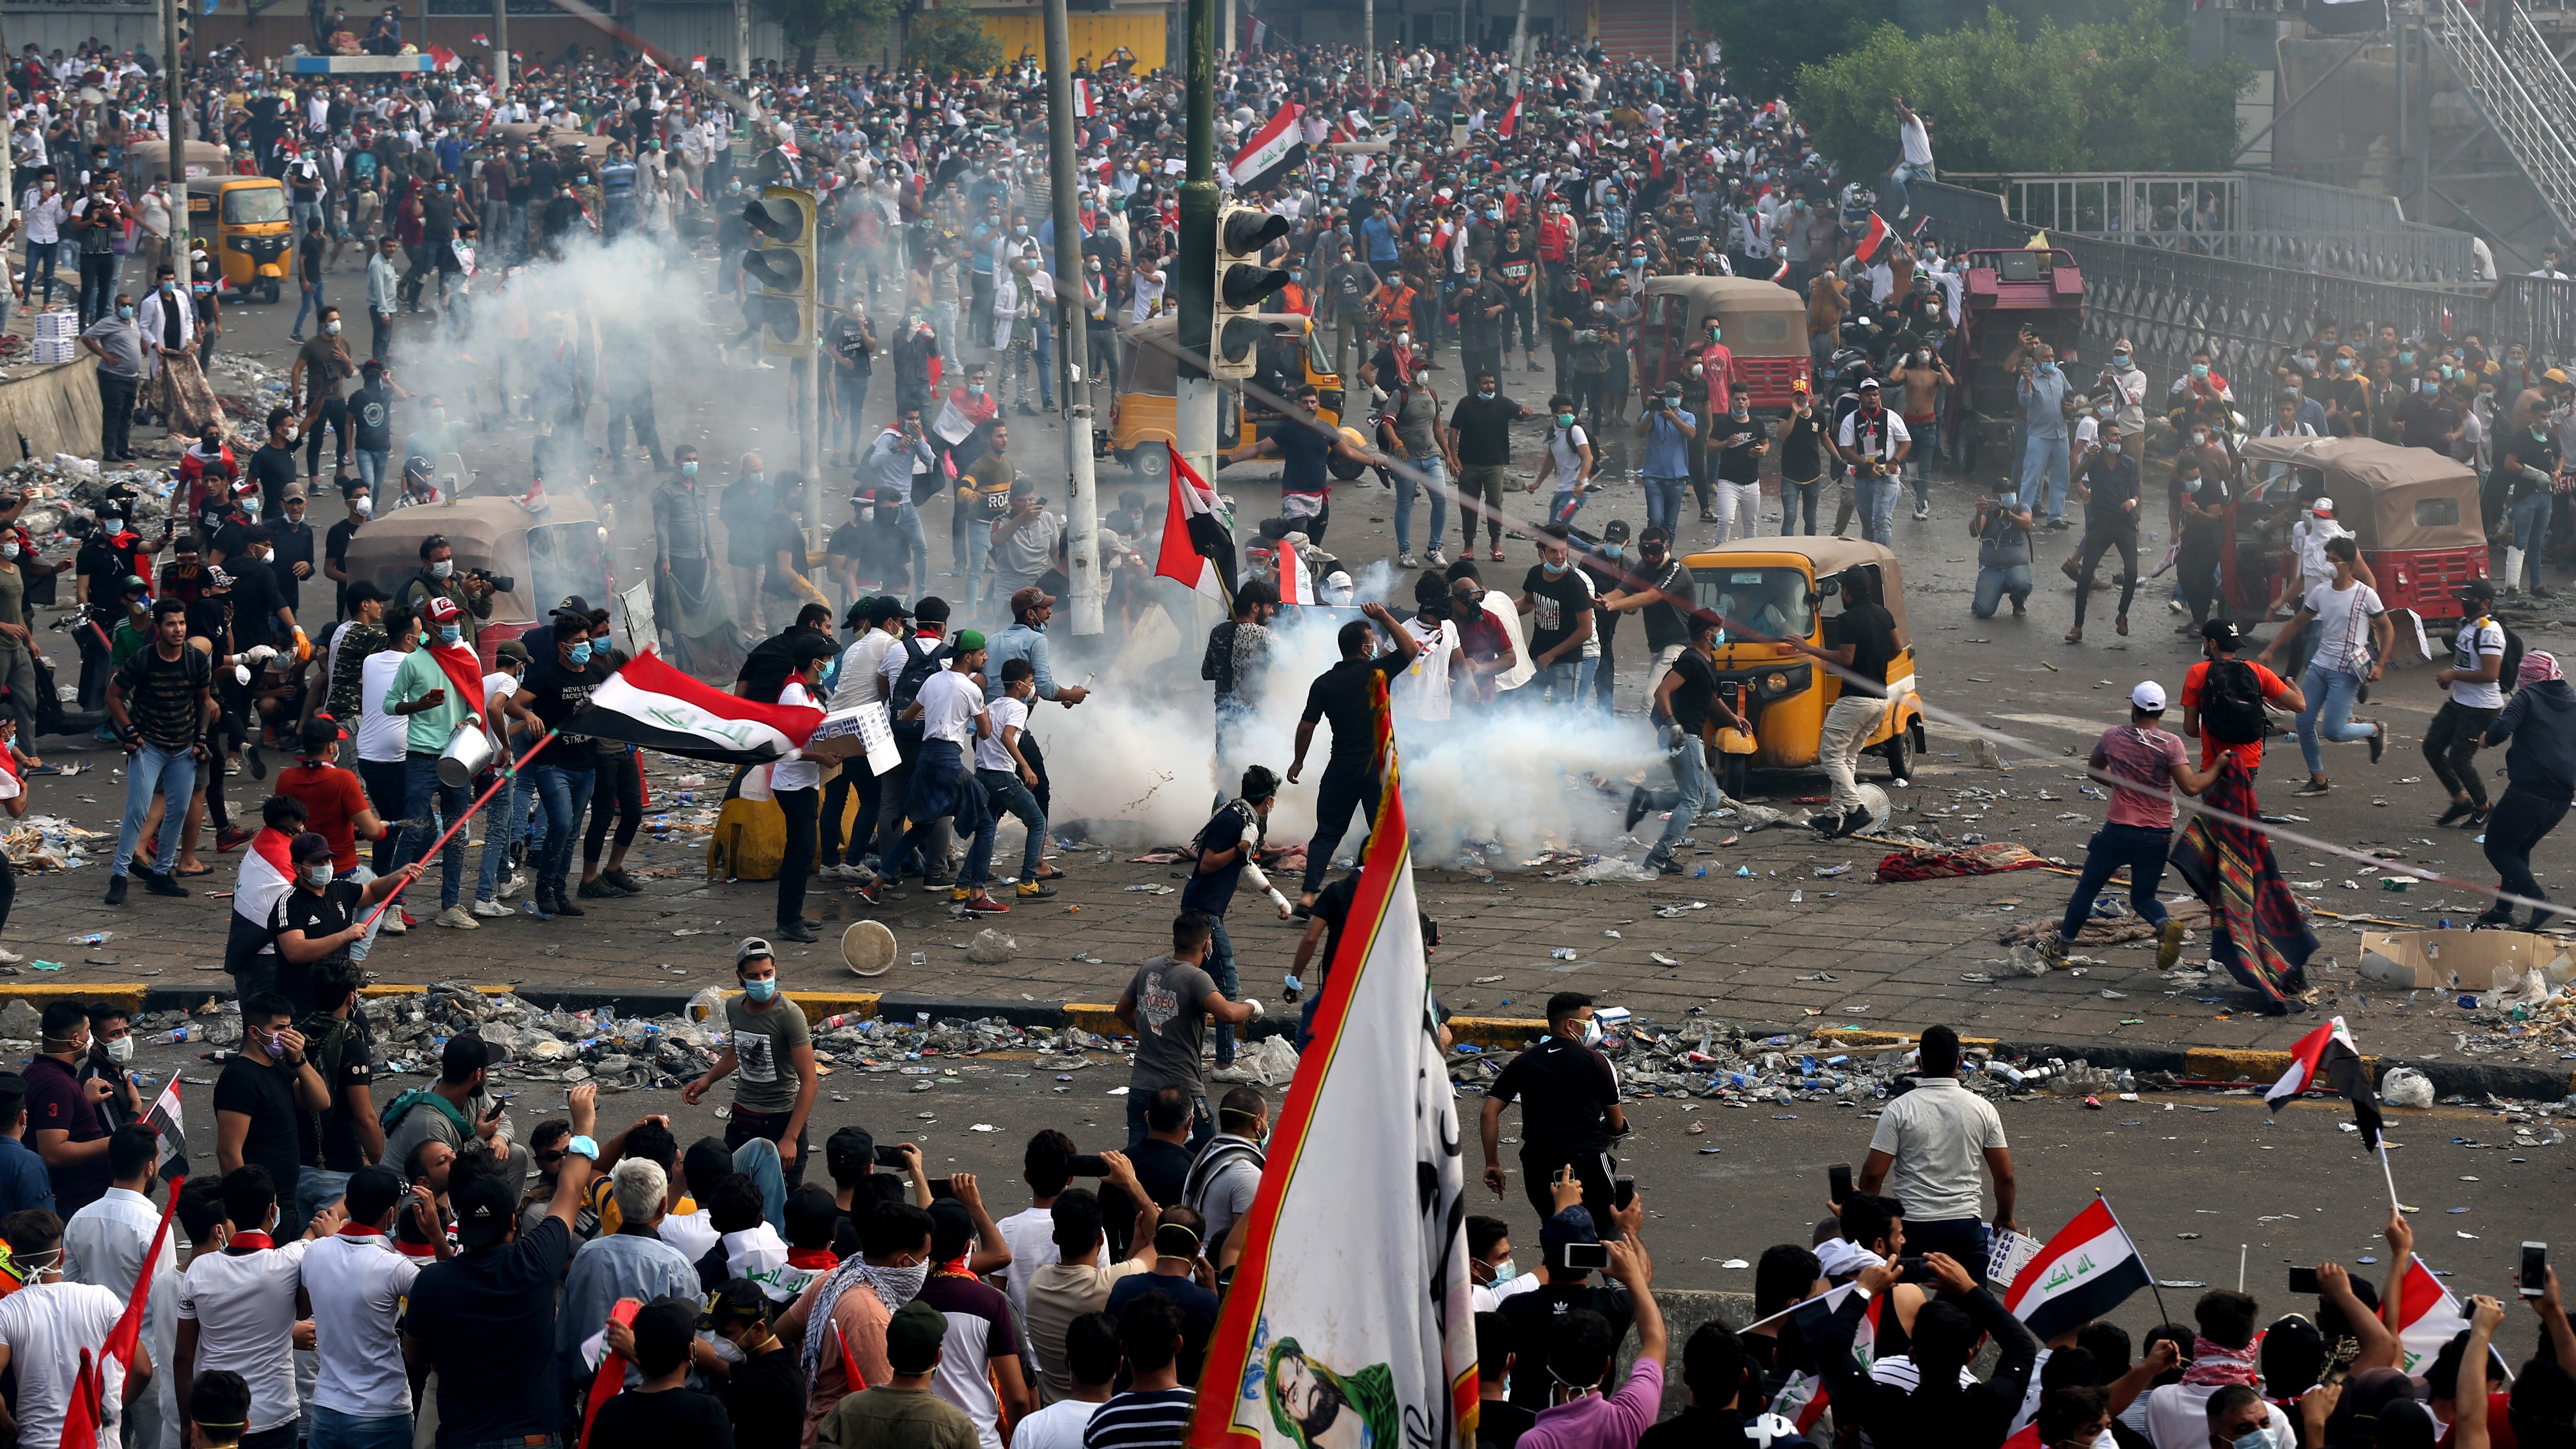 Iraqi Demonstrations Grow Even Larger but Violence Suppressed